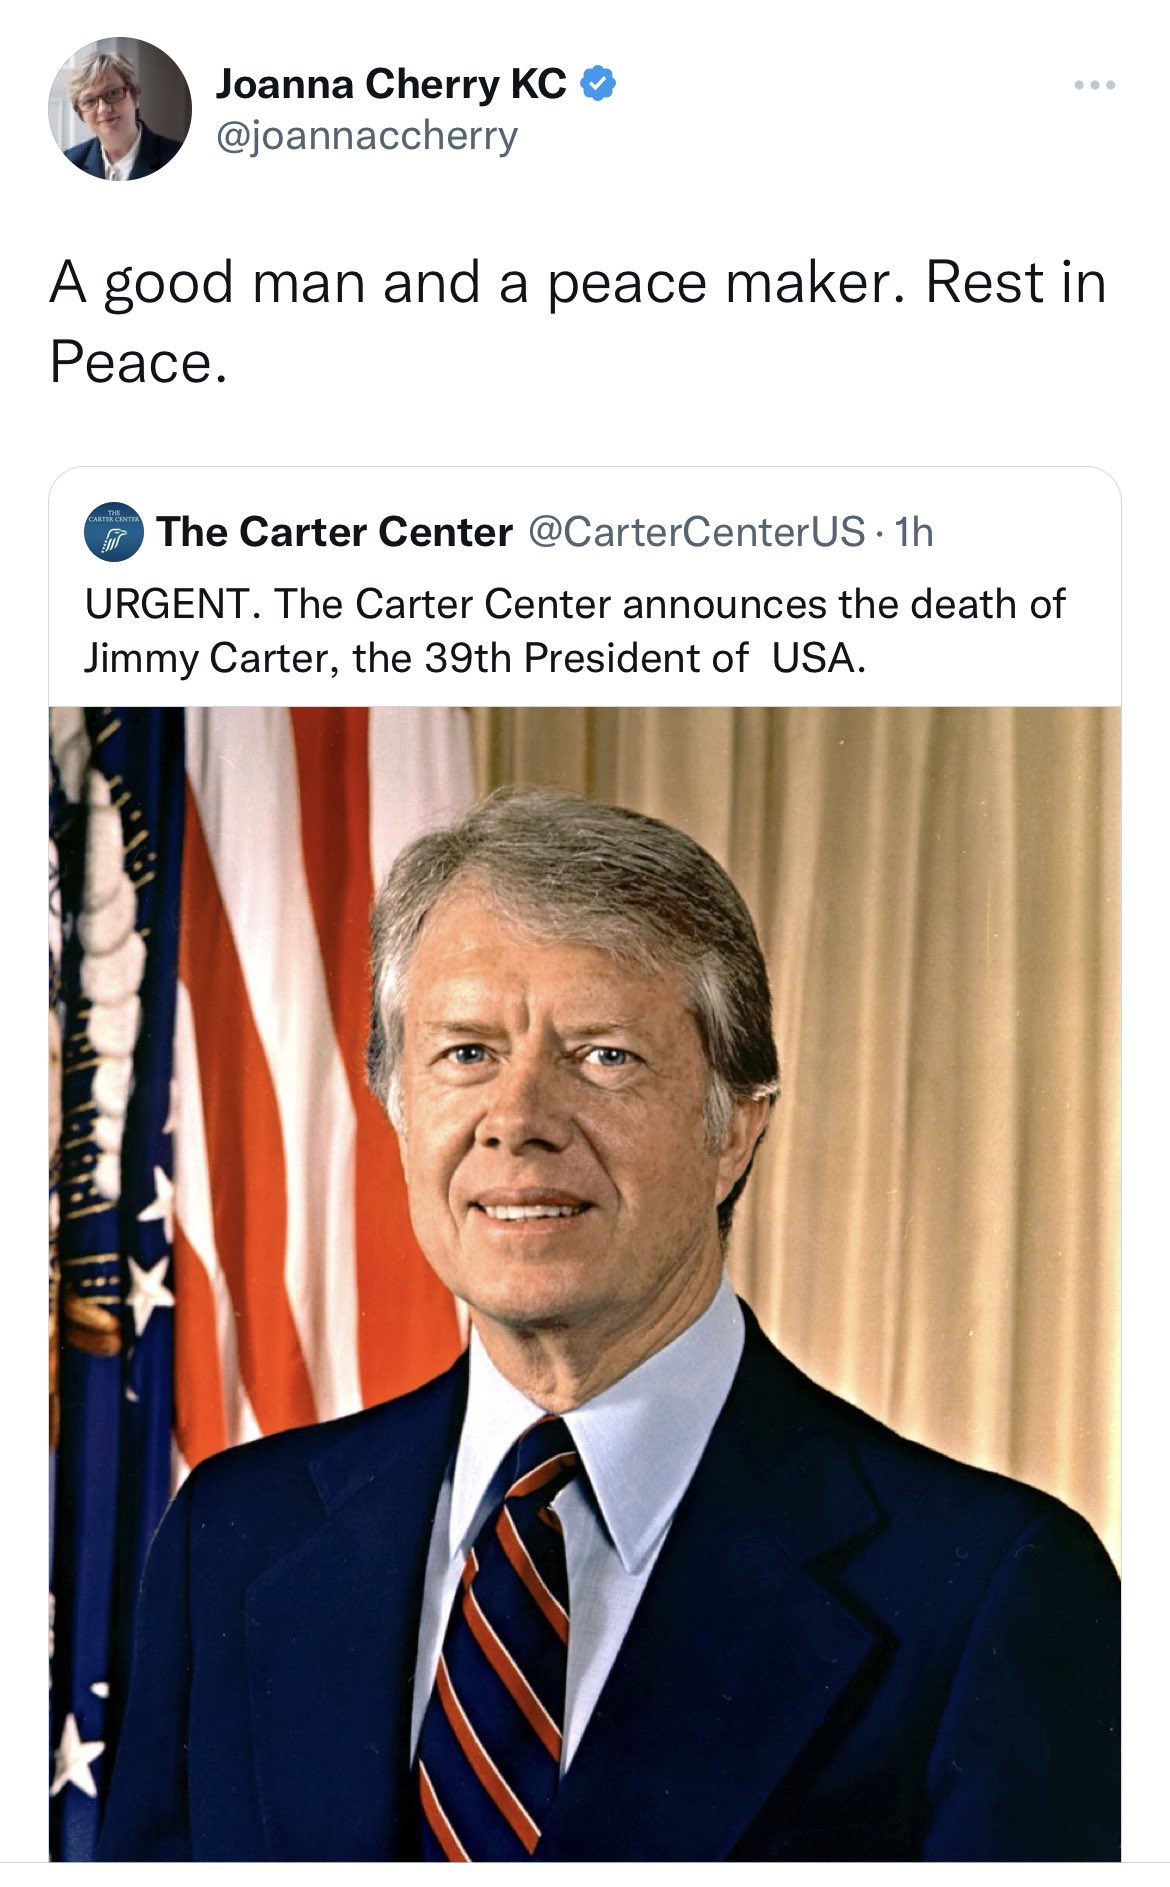 fake twitter posts - jimmy carter powerpoint - A good man and a peace maker. Rest in Peace. Joanna Cherry Kc Carter Center The Carter Center . 1h Urgent. The Carter Center announces the death of Jimmy Carter, the 39th President of Usa. Tx